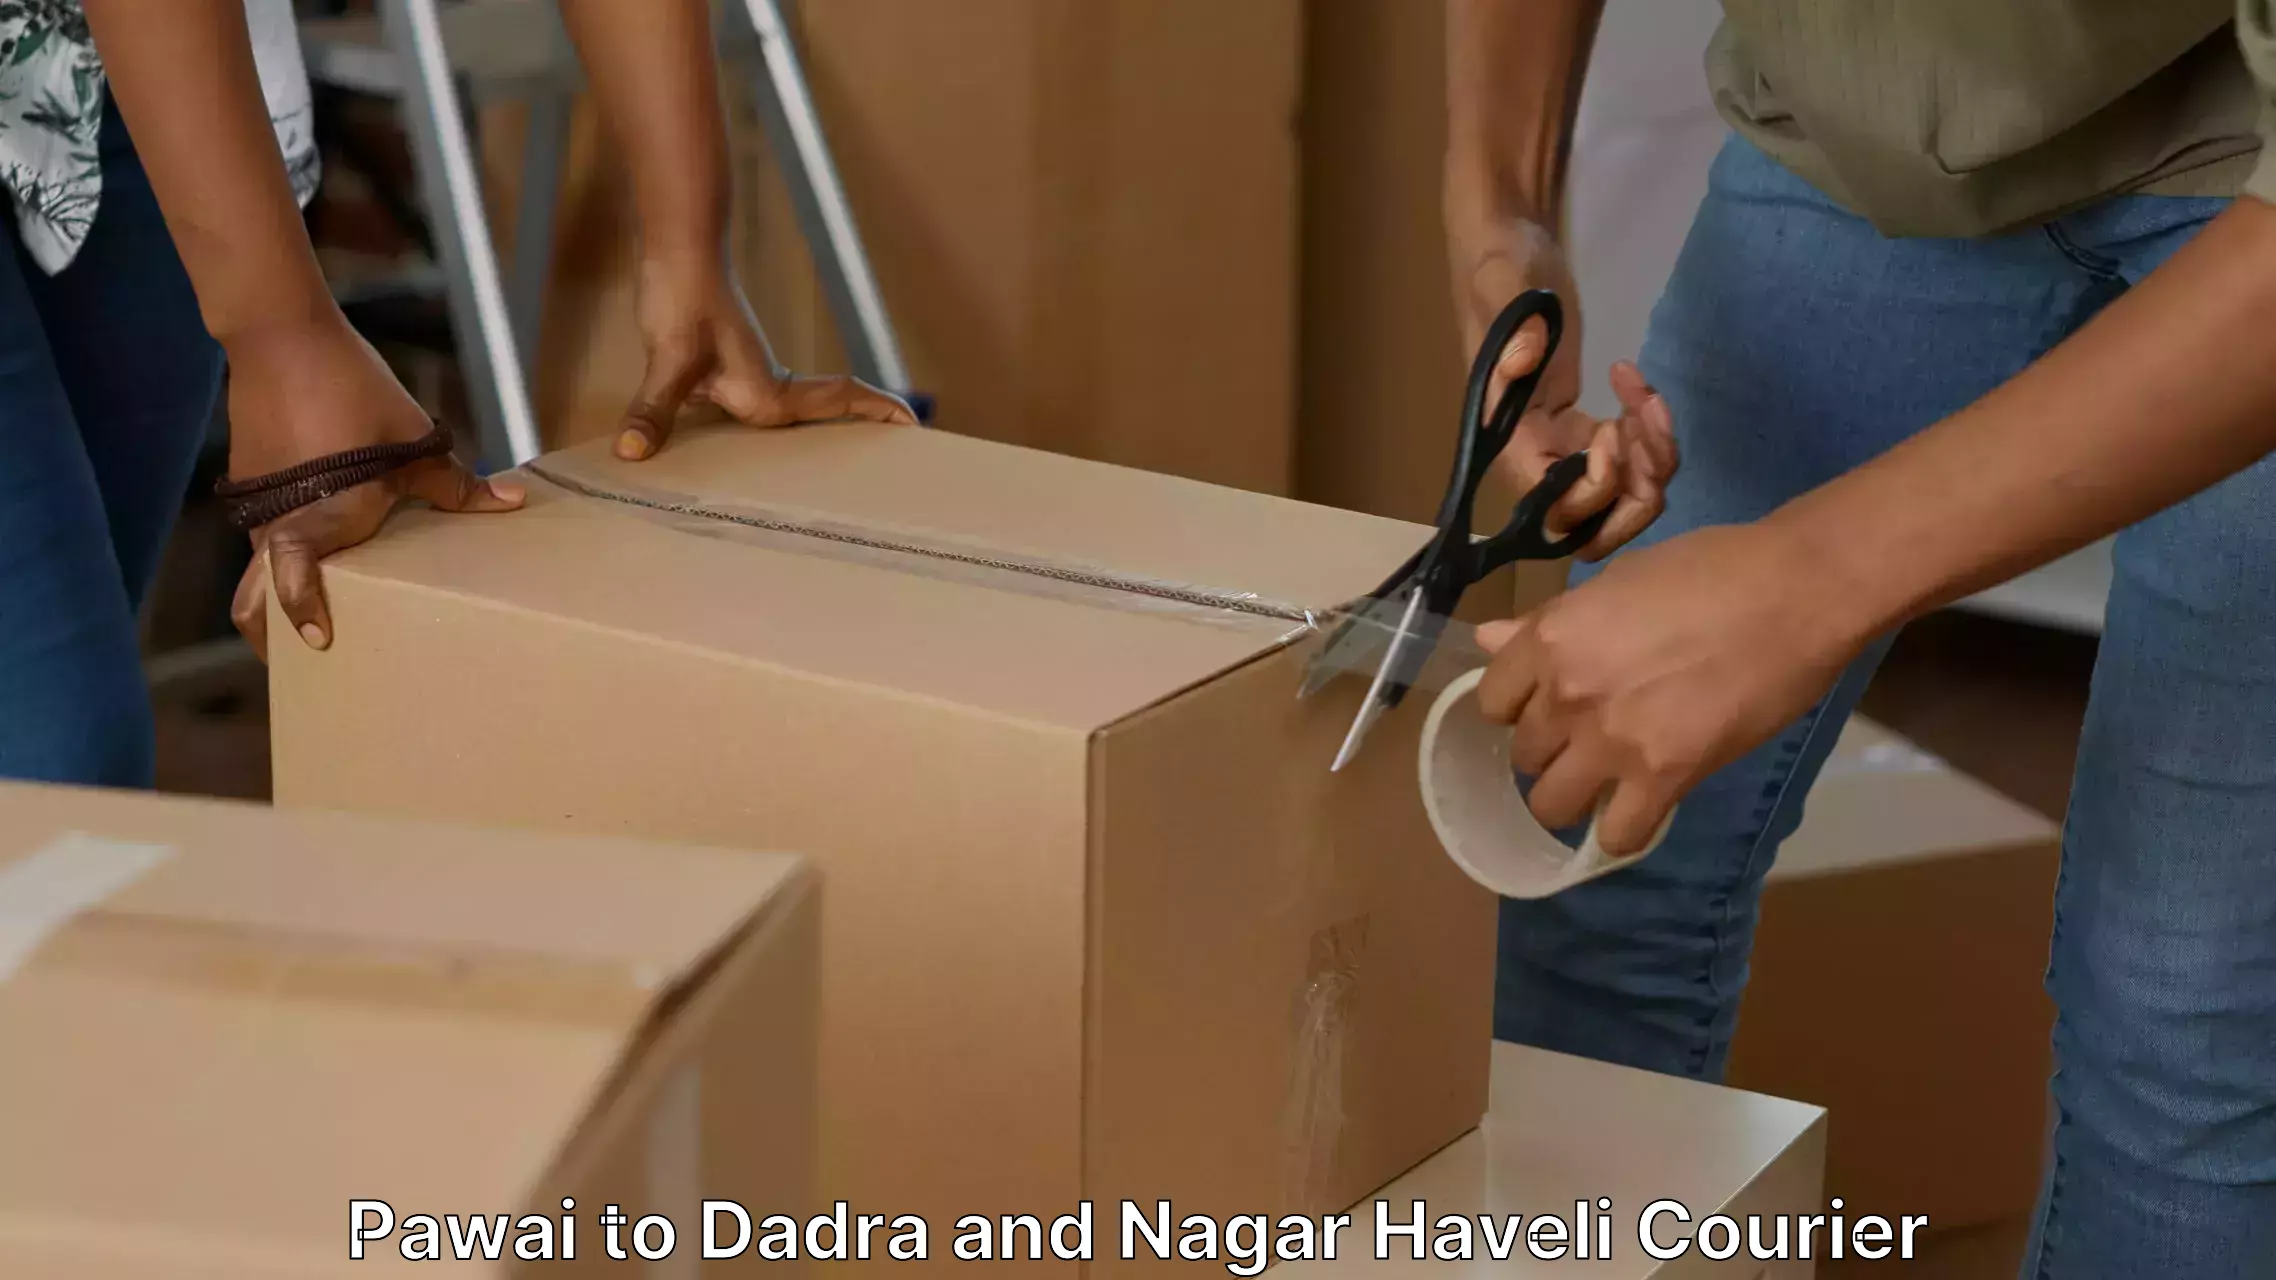 Trusted relocation experts Pawai to Dadra and Nagar Haveli